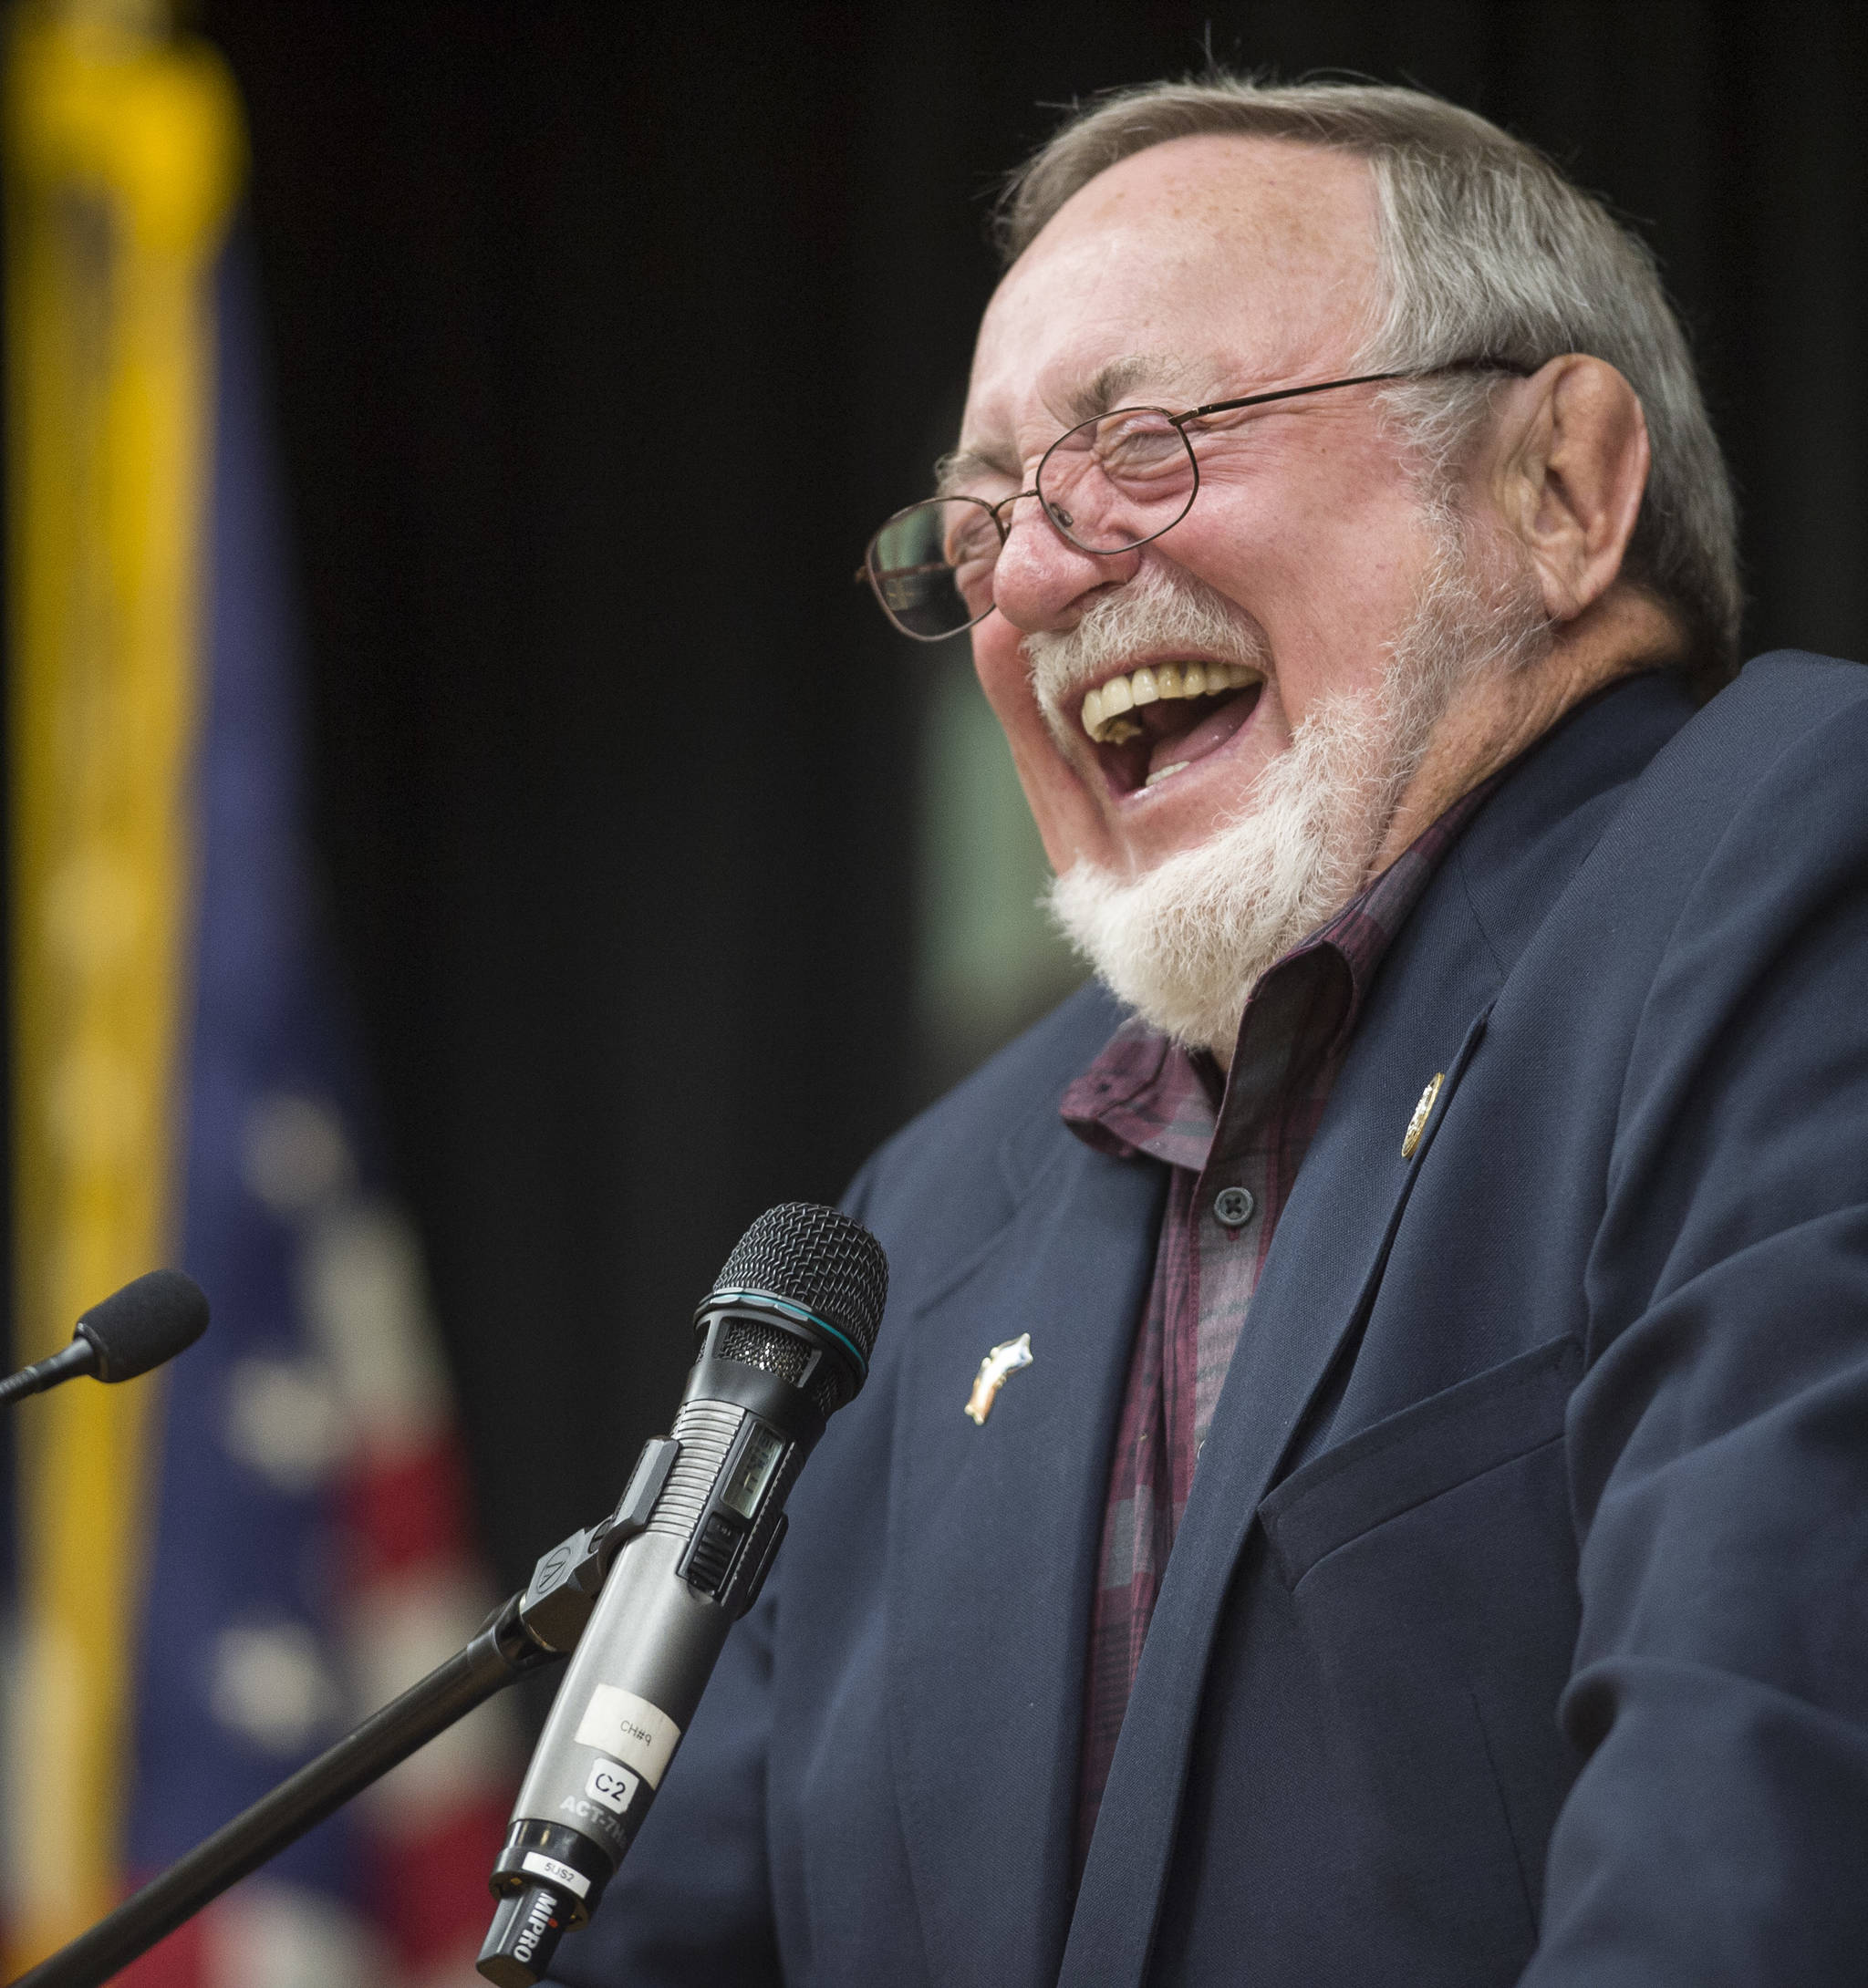 U.S. Rep. Don Young, R-Alaska, laughs while responding to a question at the Native Issues Forum at the Elizabeth Peratrovich Hall on Wednesday, August 1, 2018. (Michael Penn | Juneau Empire)